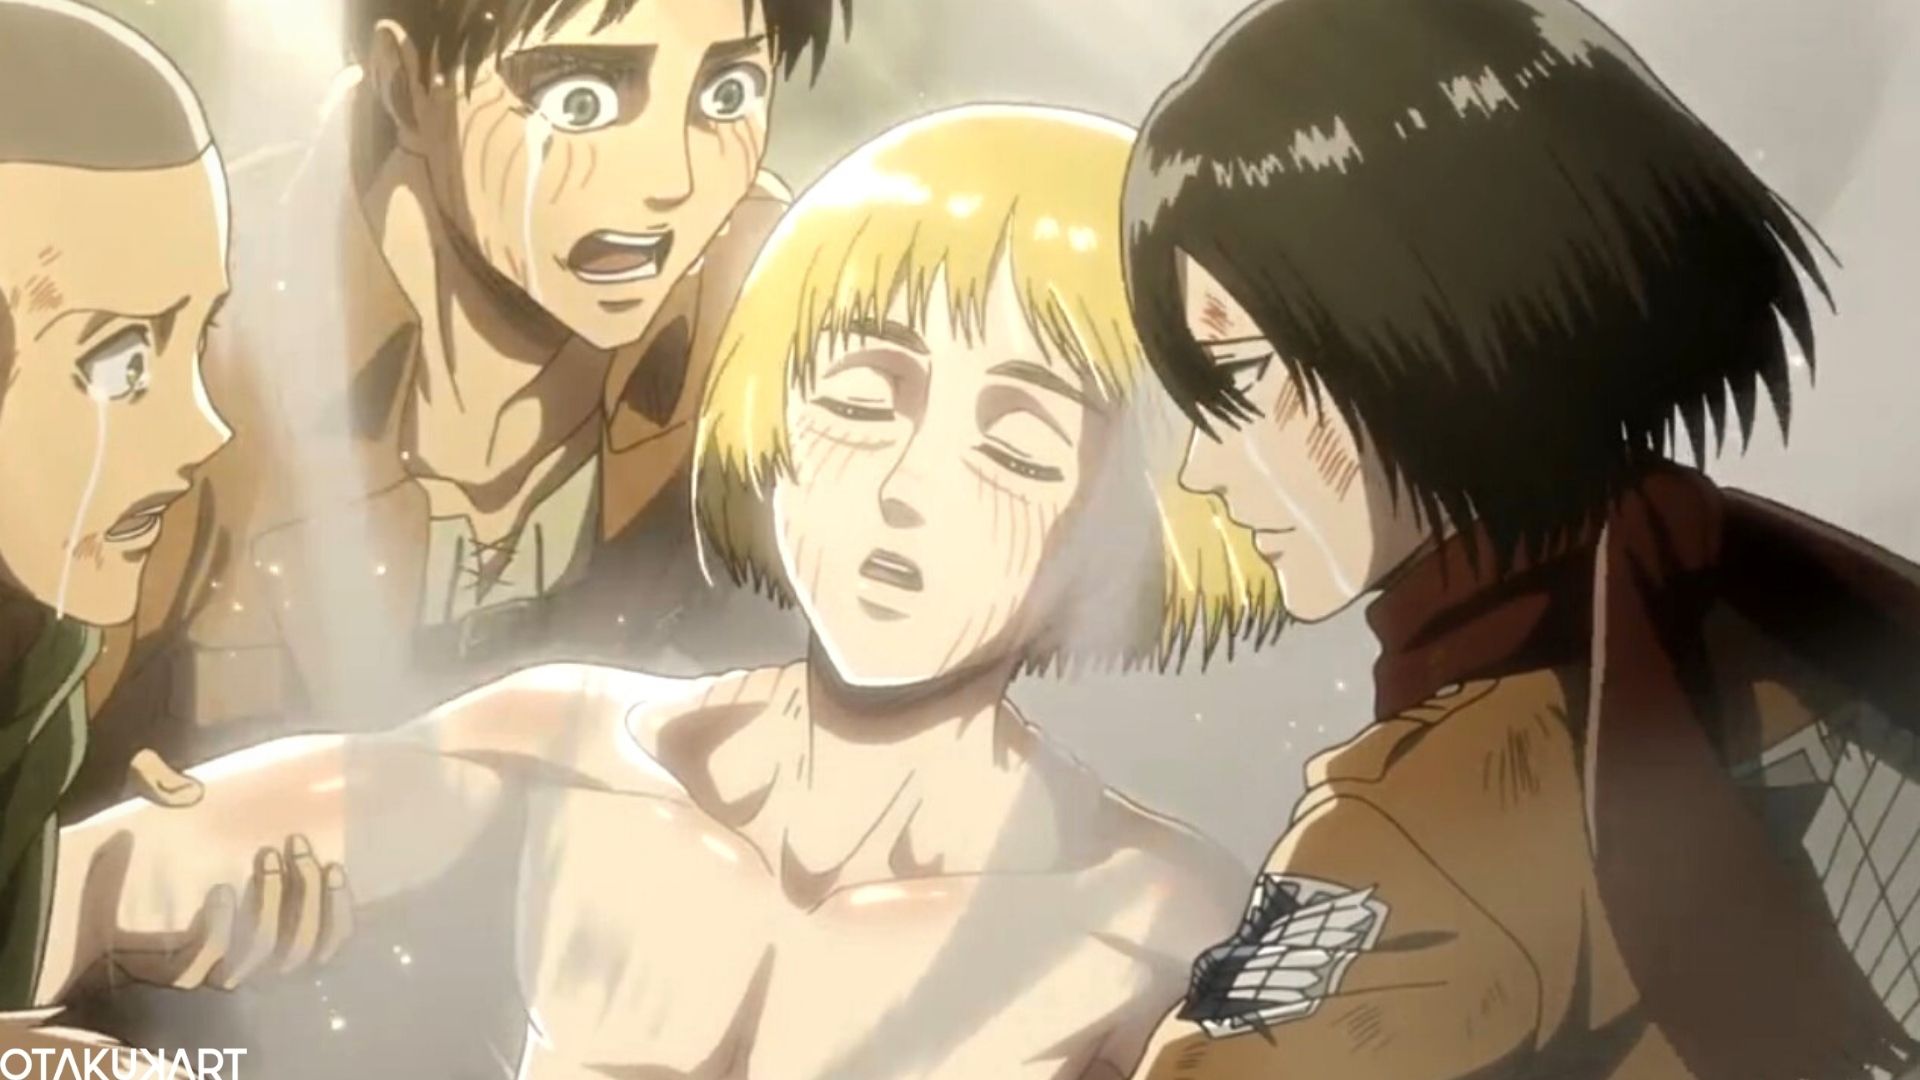 Armin VS Erwin: Who Should Have Deserved The Power of Colossal Titan?